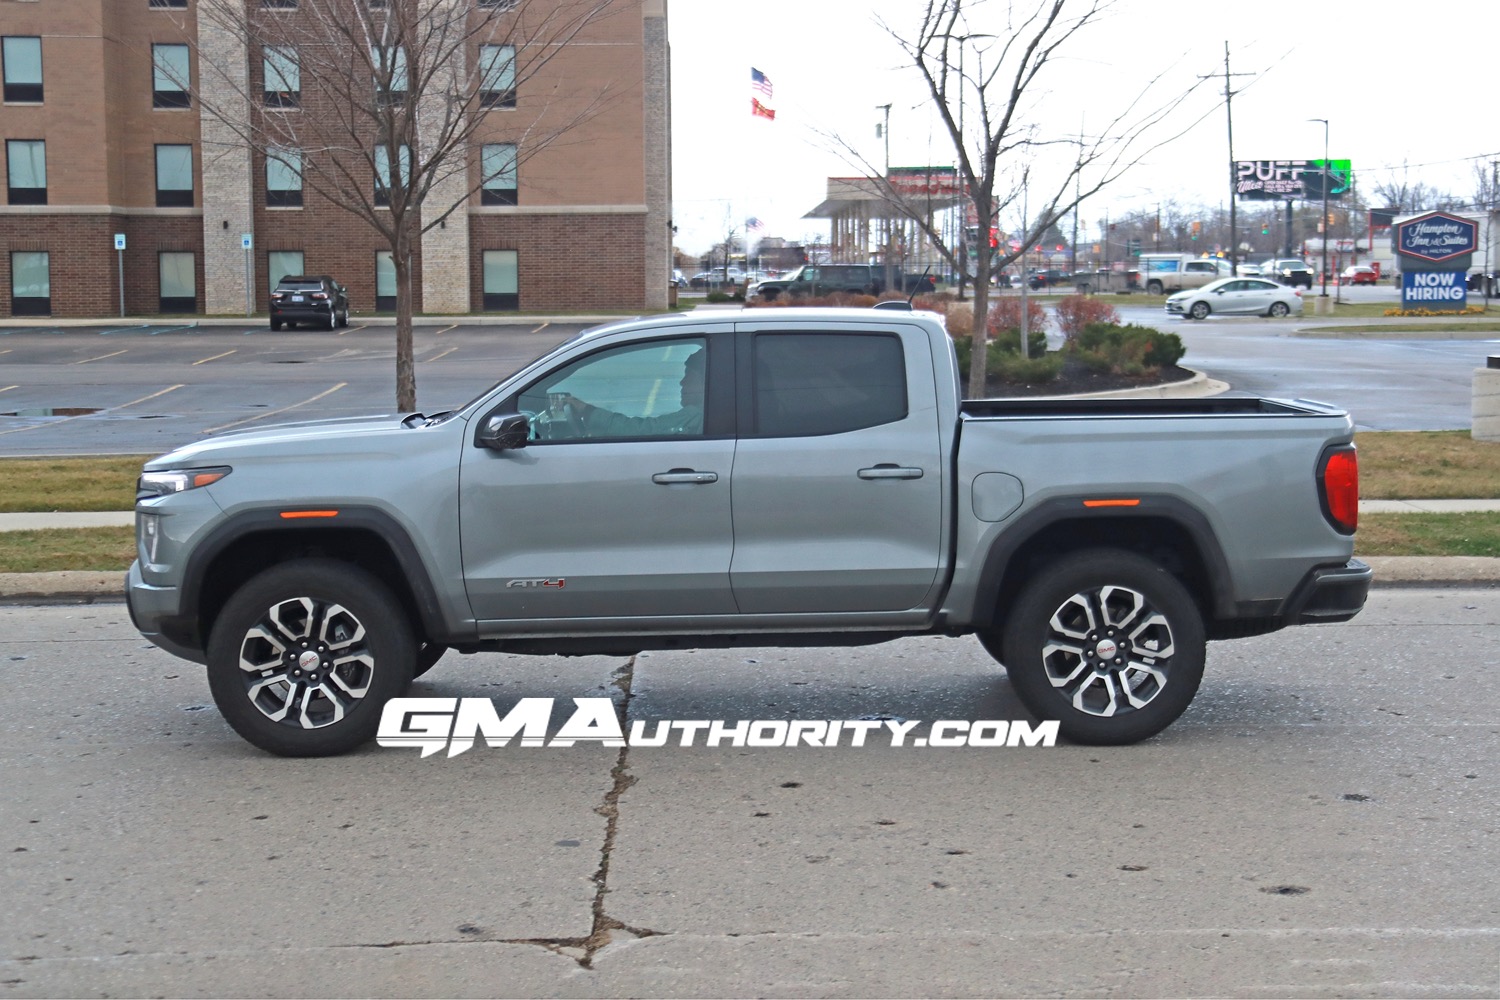 2023-gmc-canyon-at4-sterling-metallic-gxd-20-inch-wheels-rd5-real-world-photos-exterior3-chevrolet-colorado-trail-boss-sterling-gray-metallic-gxd-first-real-world-photos-exterior-005